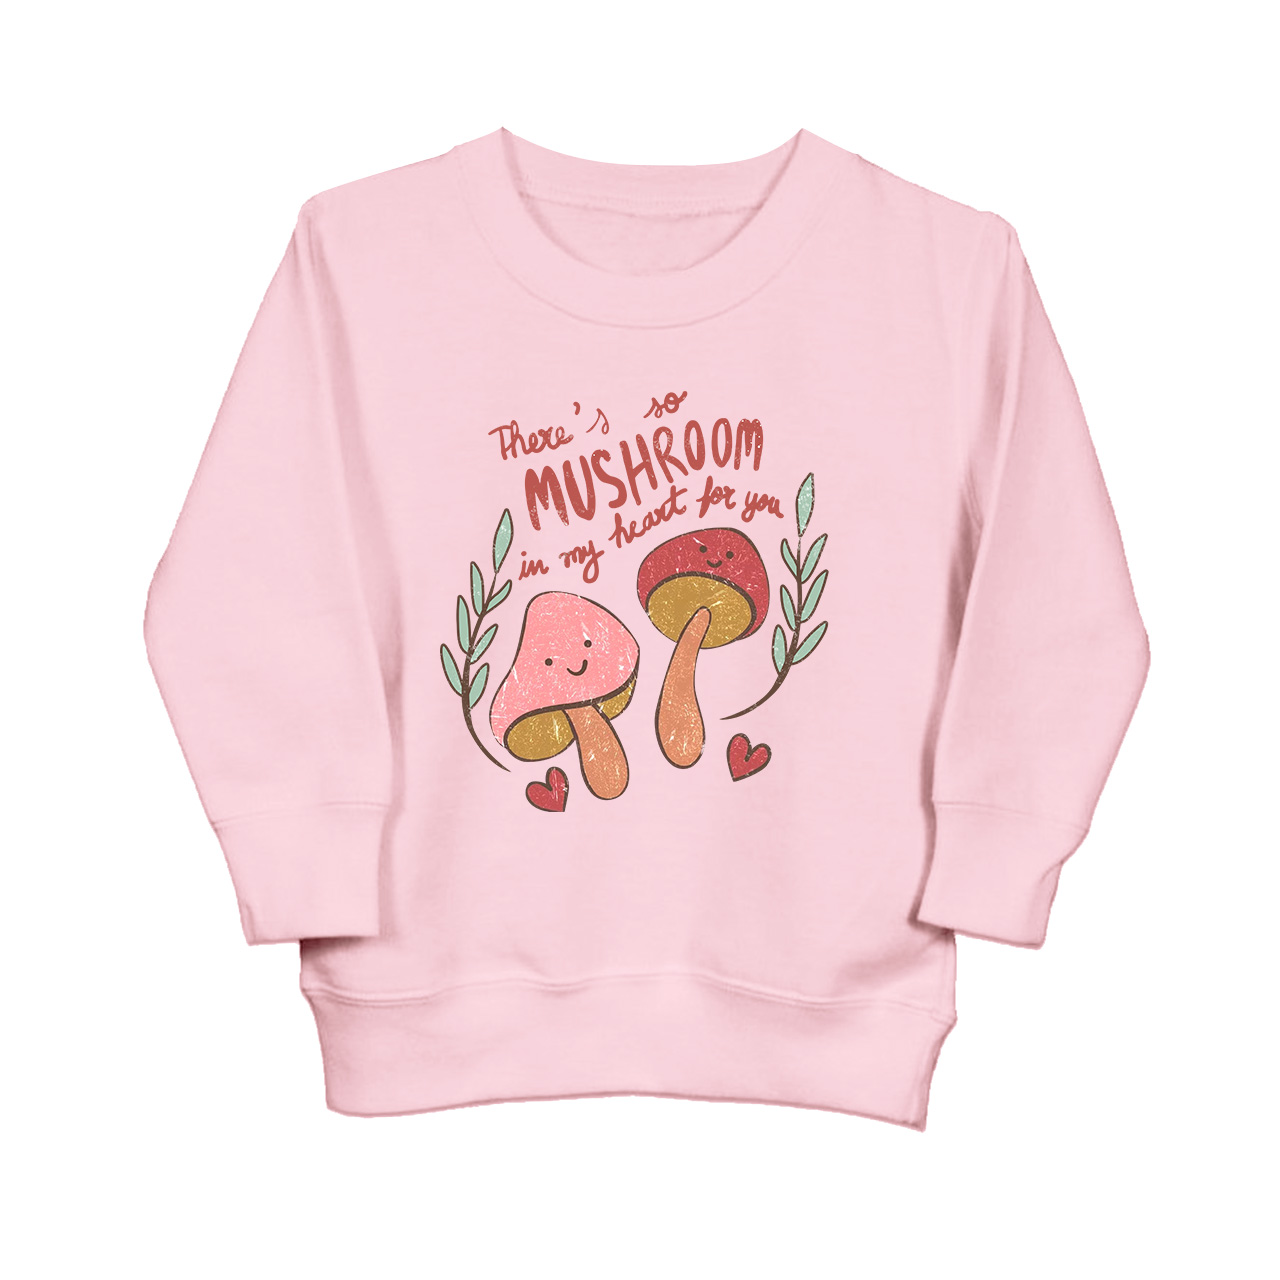 There's No Mushroom In My Heart For You Kids Sweatshirt